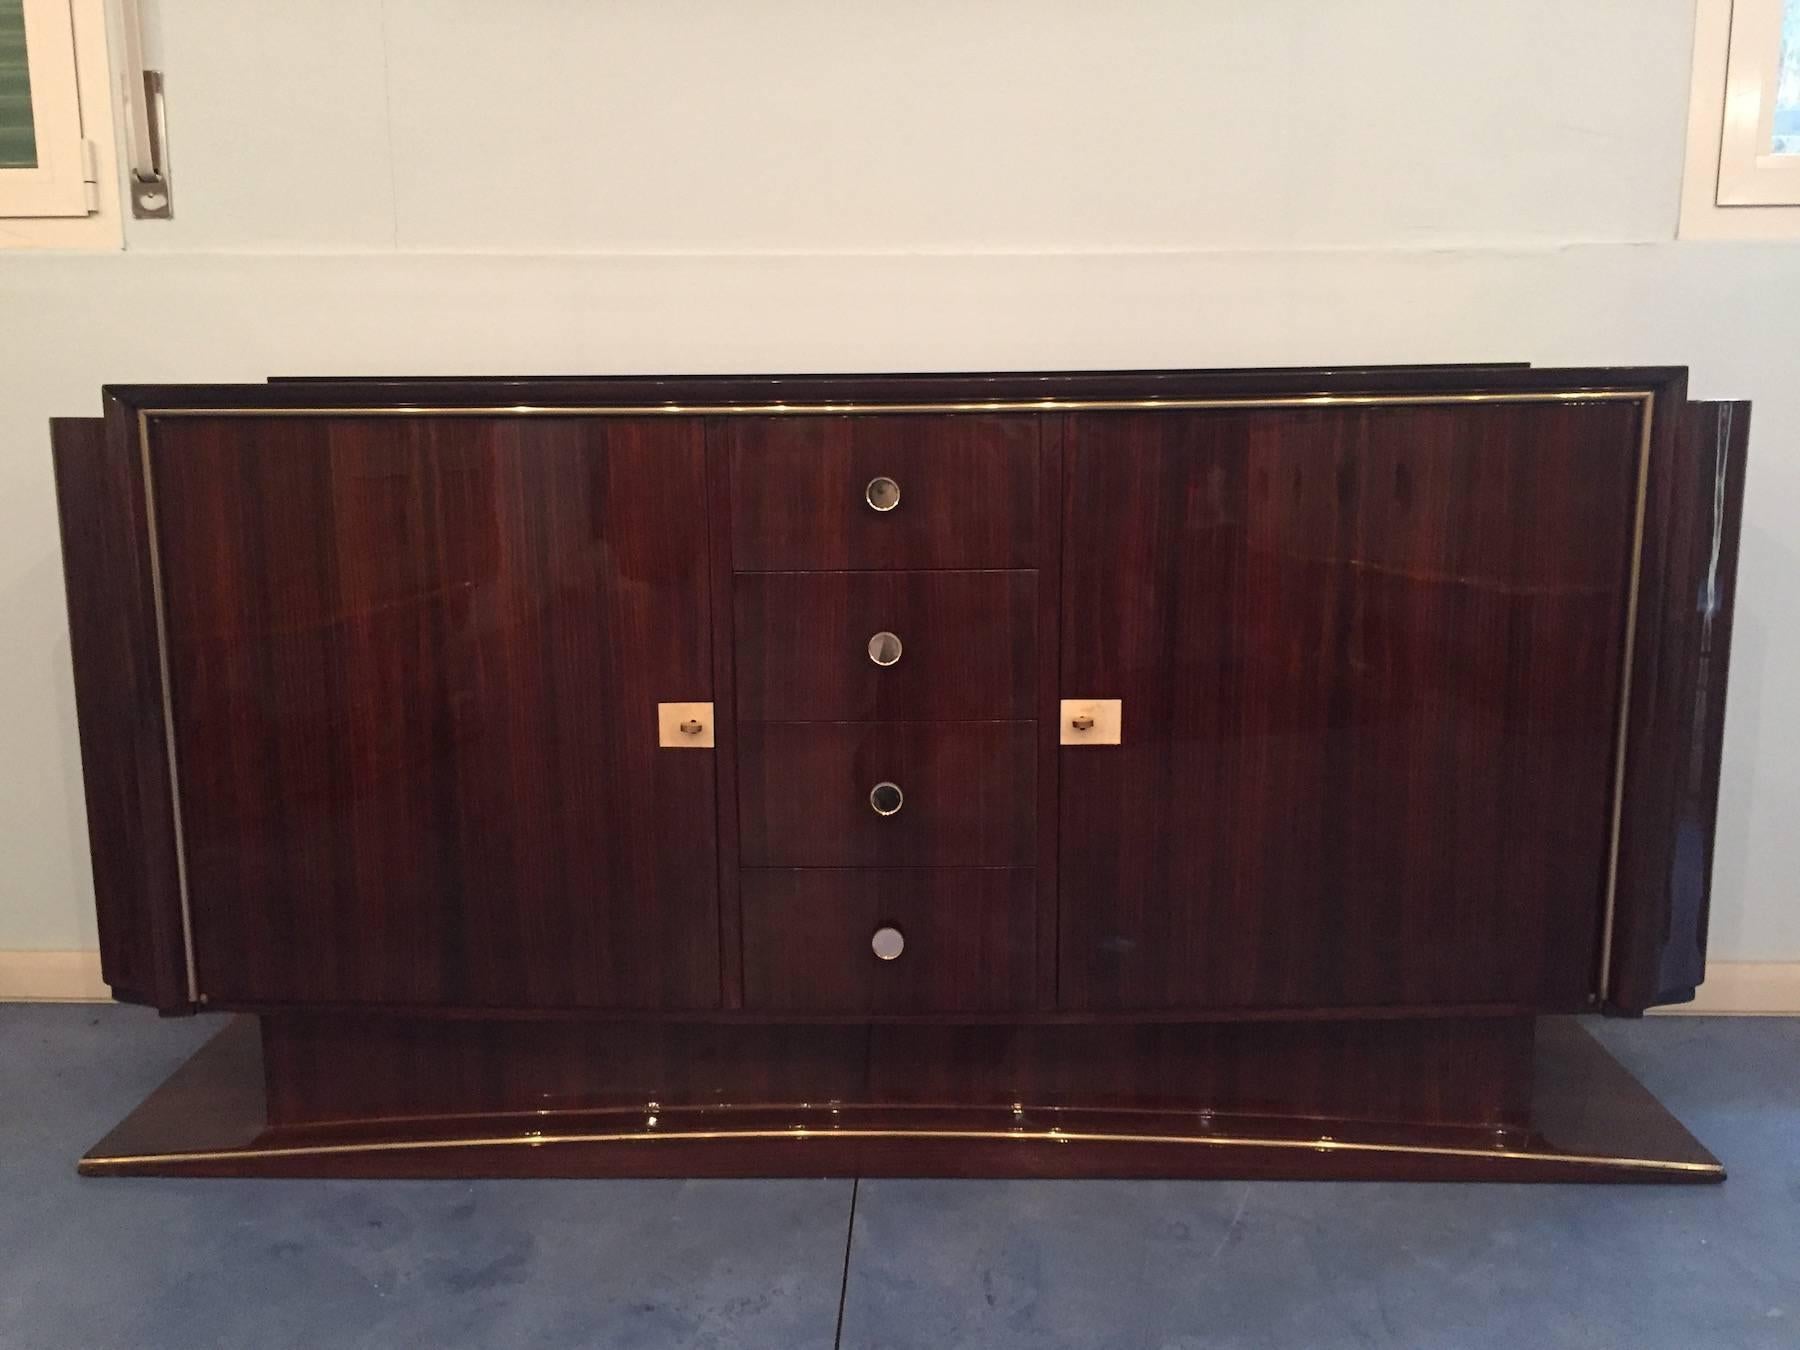 Elegant French Art Deco sideboard in rosewood, slightly arched lines on the front, top in opaline, splendid movement on the sides, “moustache” legs. Golden metal finishing, doors decorated in parchment, insides in maple.